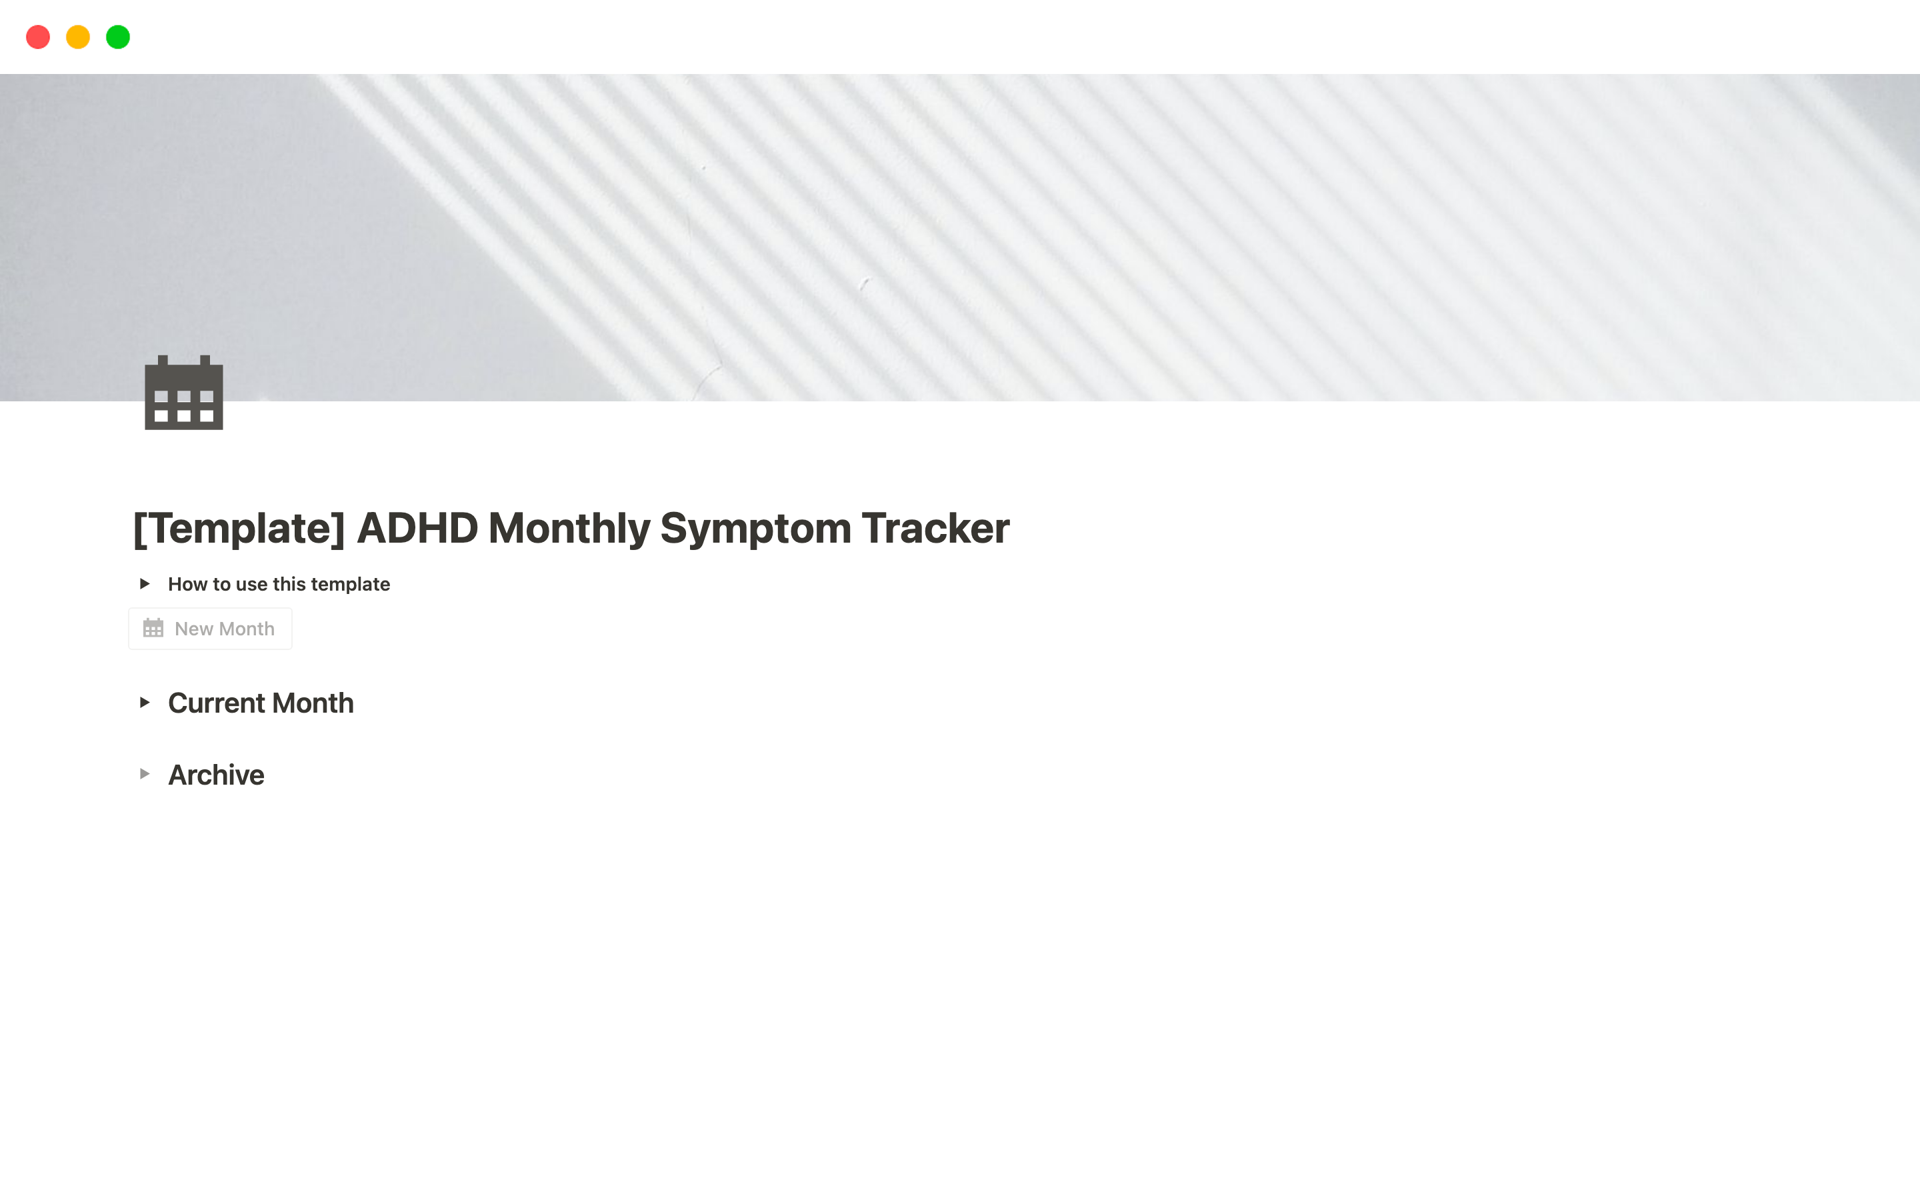 🌟 Elevate Your ADHD Management with Our Monthly Symptom Tracker Notion Template! 🌟